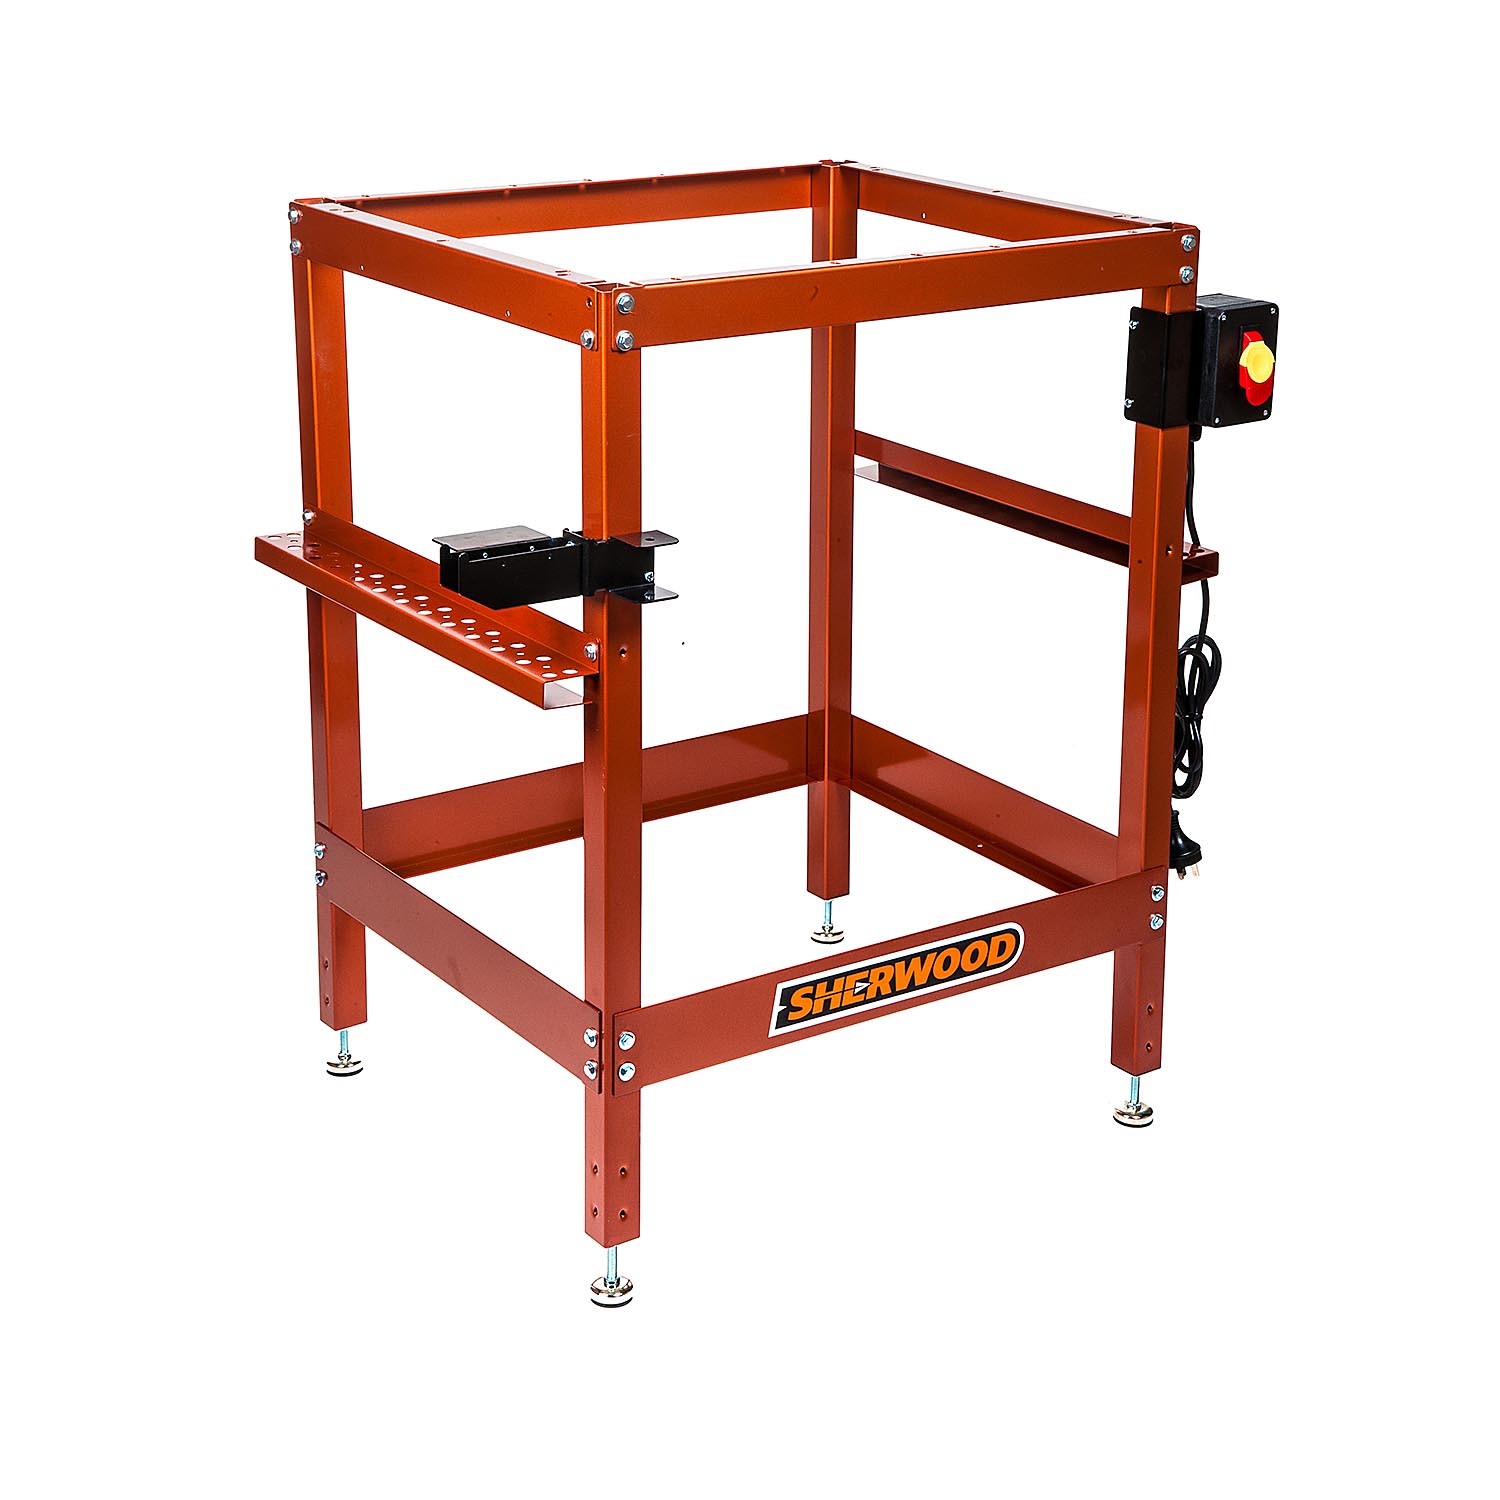 CWS Store Router Table Floor Stand